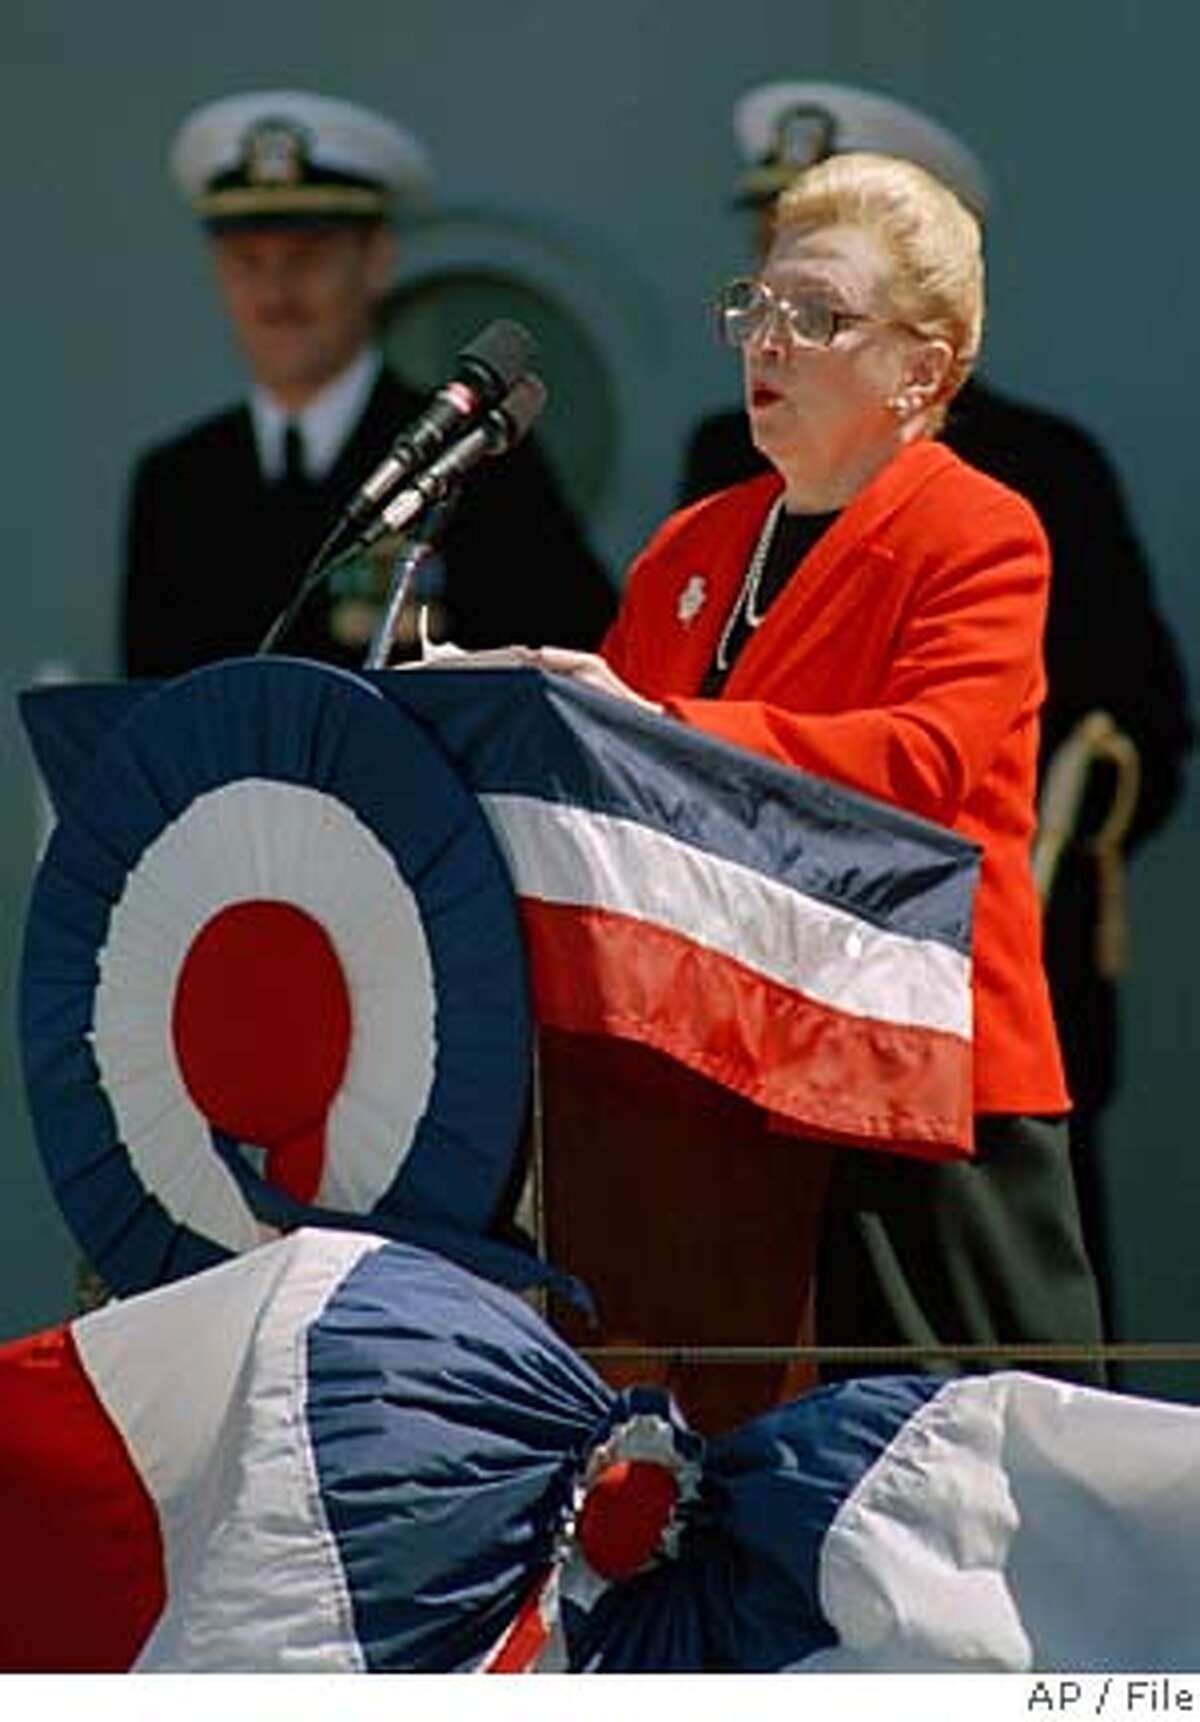 ** FILE ** Margaret Truman-Daniel speaks during the re commissioning ceremonies for the Iowa-class battleship in San Francisco in this Feb. 10, 1986 file photo. Margaret Truman, the only child of former President Harry S. Truman who became a concert singer, actress, radio and TV personality and mystery writer, died Tuesday, Jan 29, 2008. She was 83. (AP Photo/File)